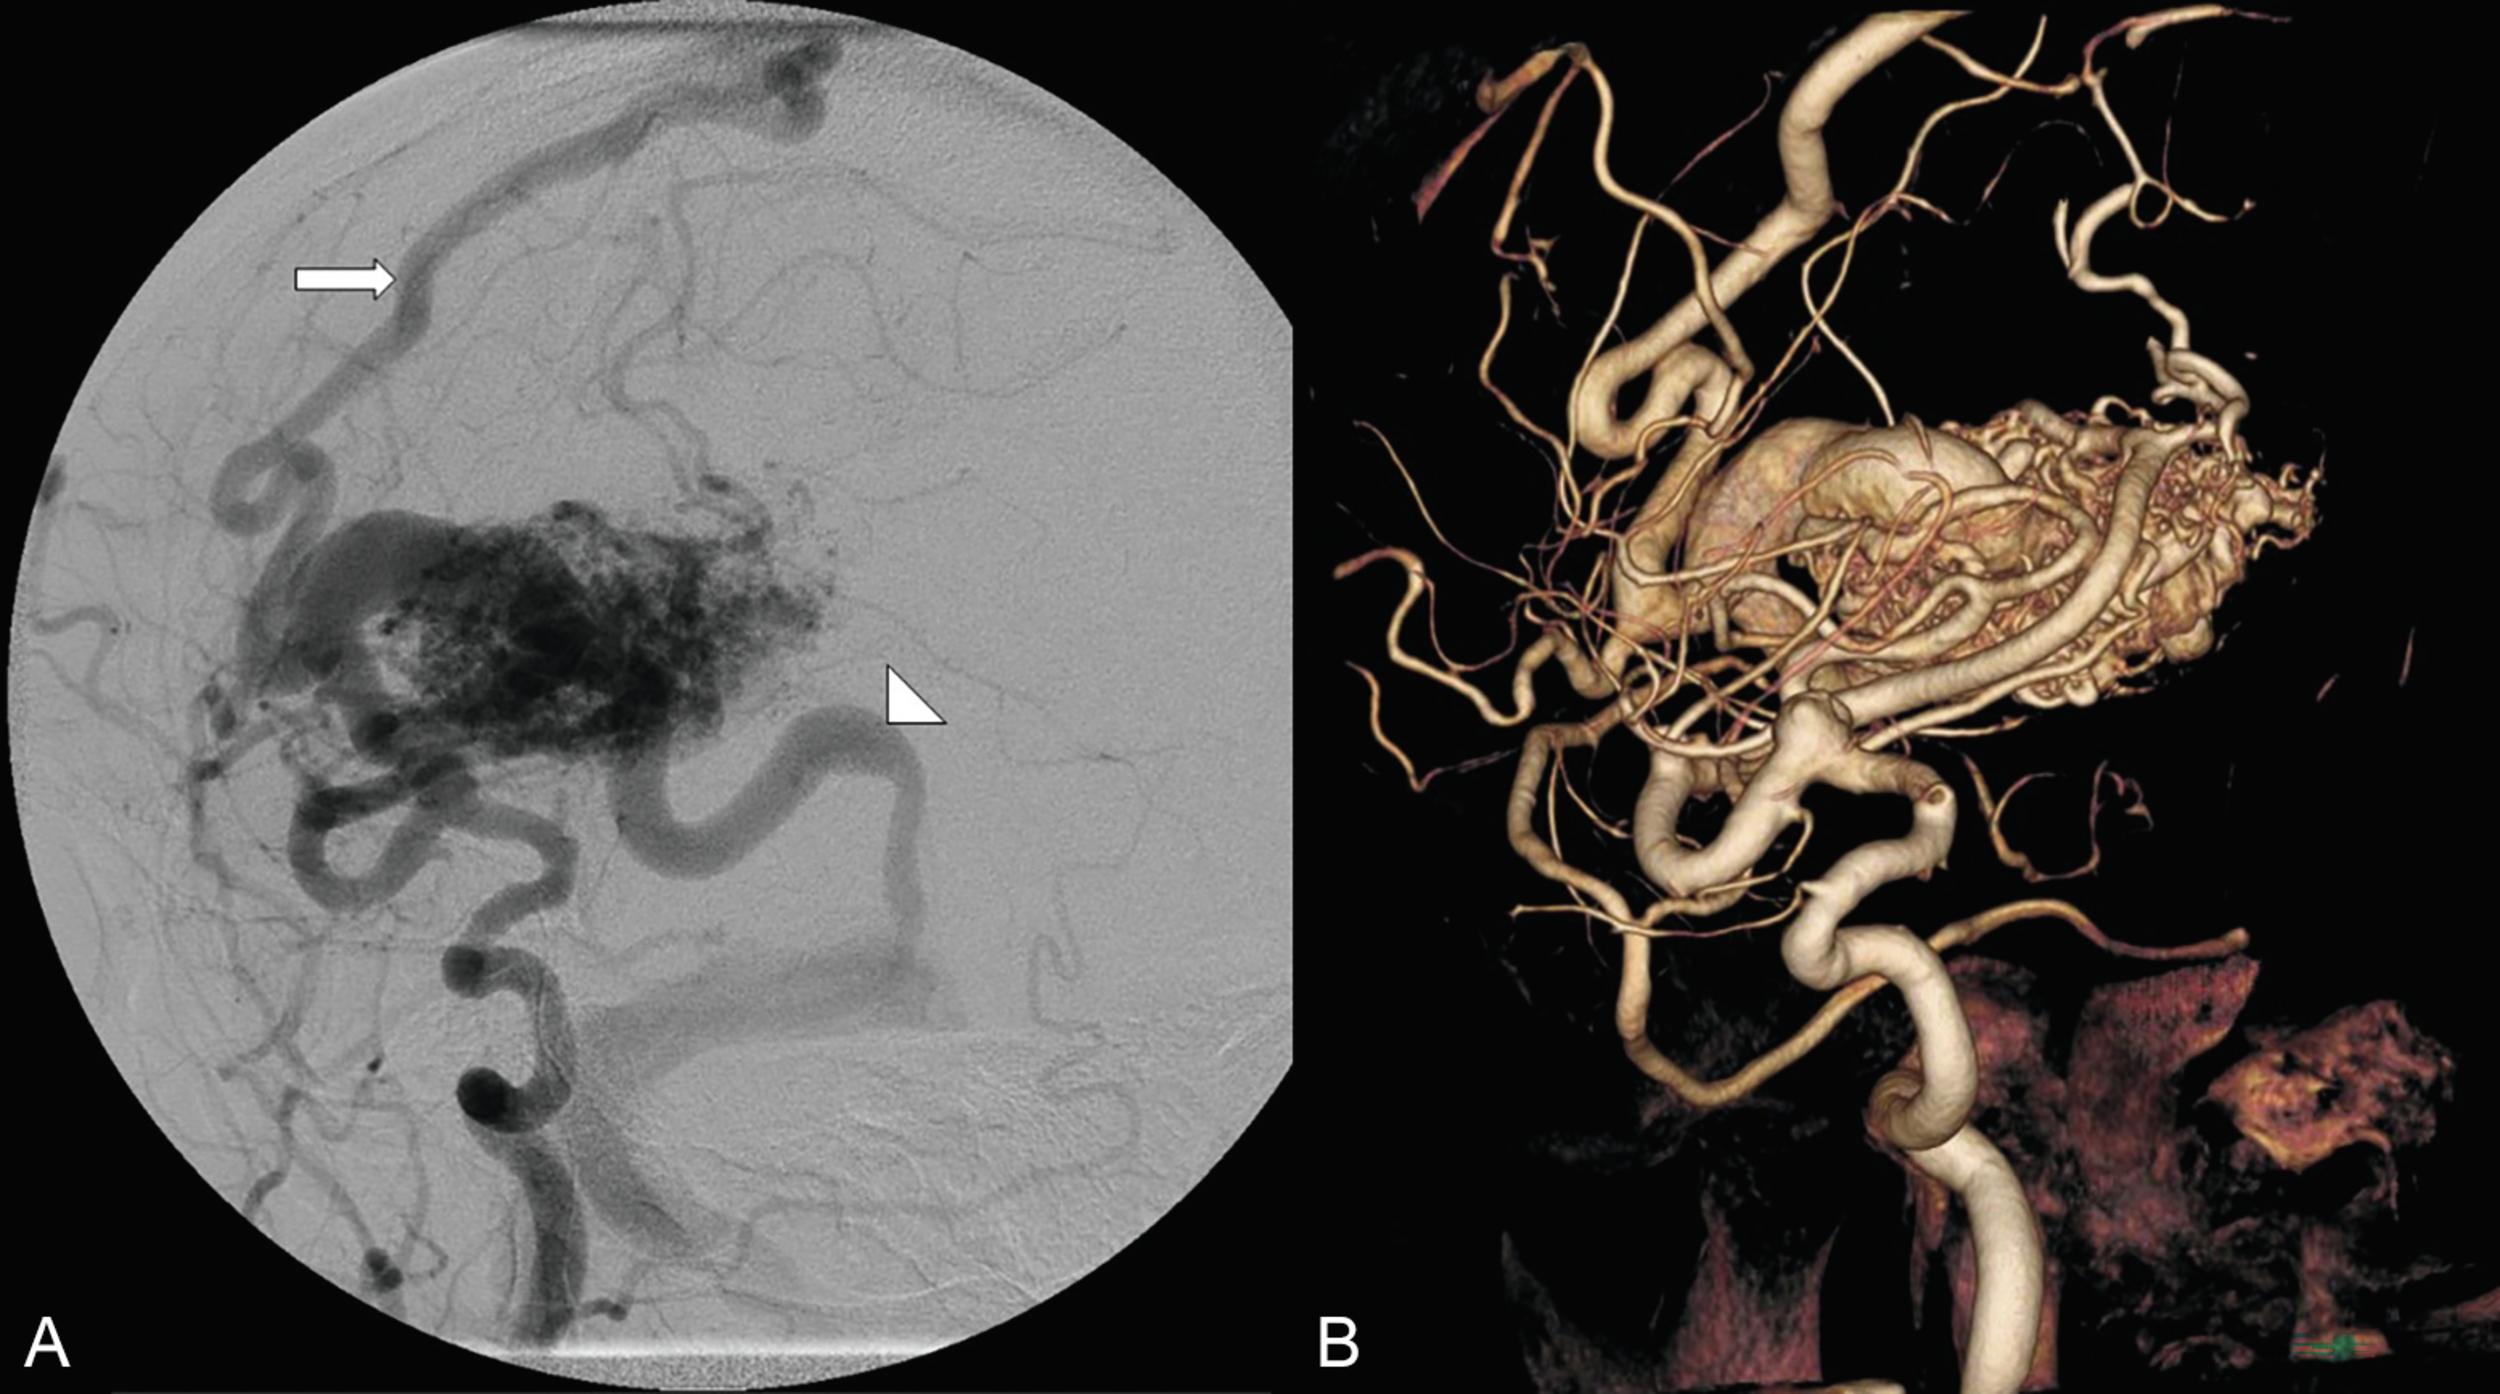 Fig. 19.3, Spetzler-Martin grade III AVM. ( A ) Lateral digital subtraction angiogram and ( B ) 3D reconstruction of Spetzler-Martin grade III AVM with a medium-size (3–6 cm) nidus in a superficial, eloquent location with superficial venous drainage via cortical veins of Troland (arrow) and Labbé (arrowhead) into the superior sagittal sinus and transverse sigmoid sinus, respectively.